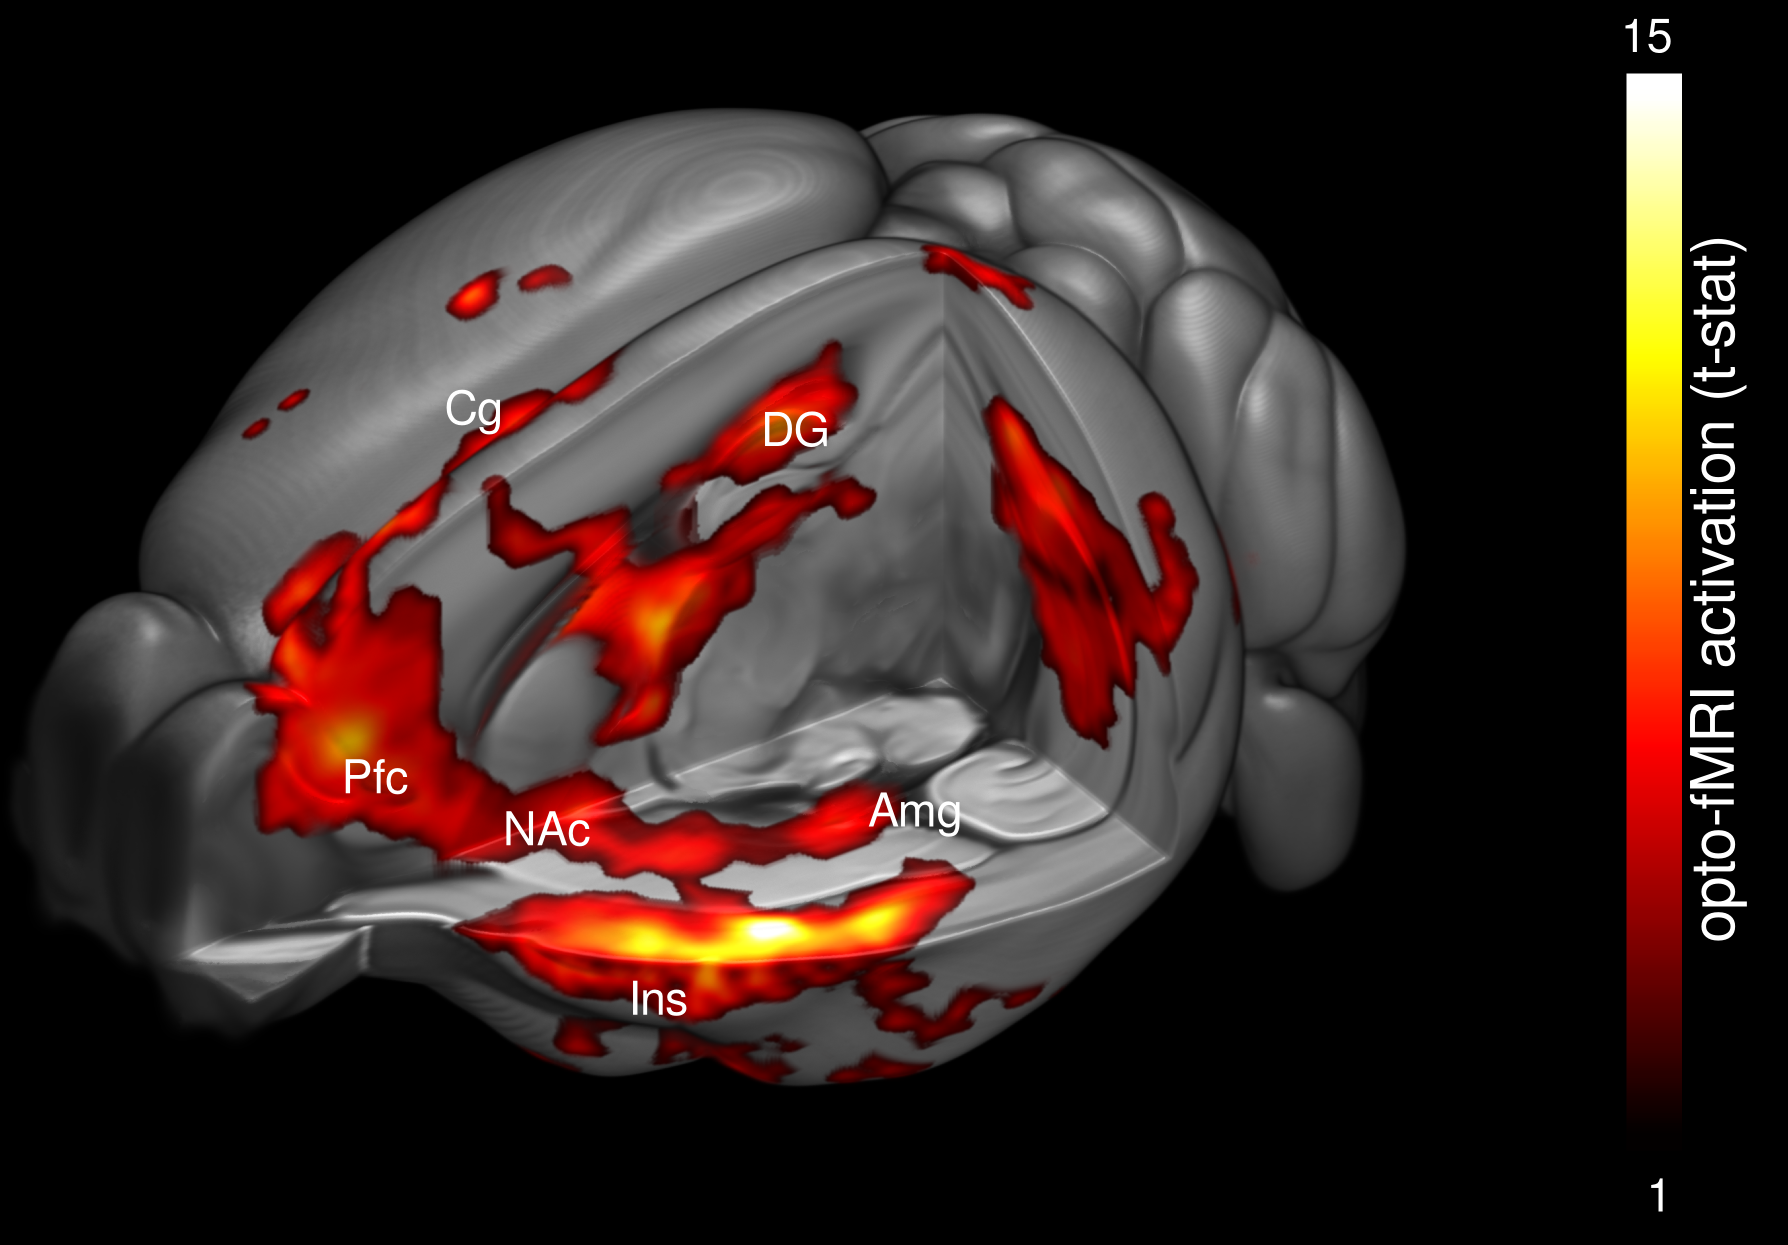 Visualization of the entorhinal connectivity with fMRI and optogenetics in a mouse model of Alzheimer's disease